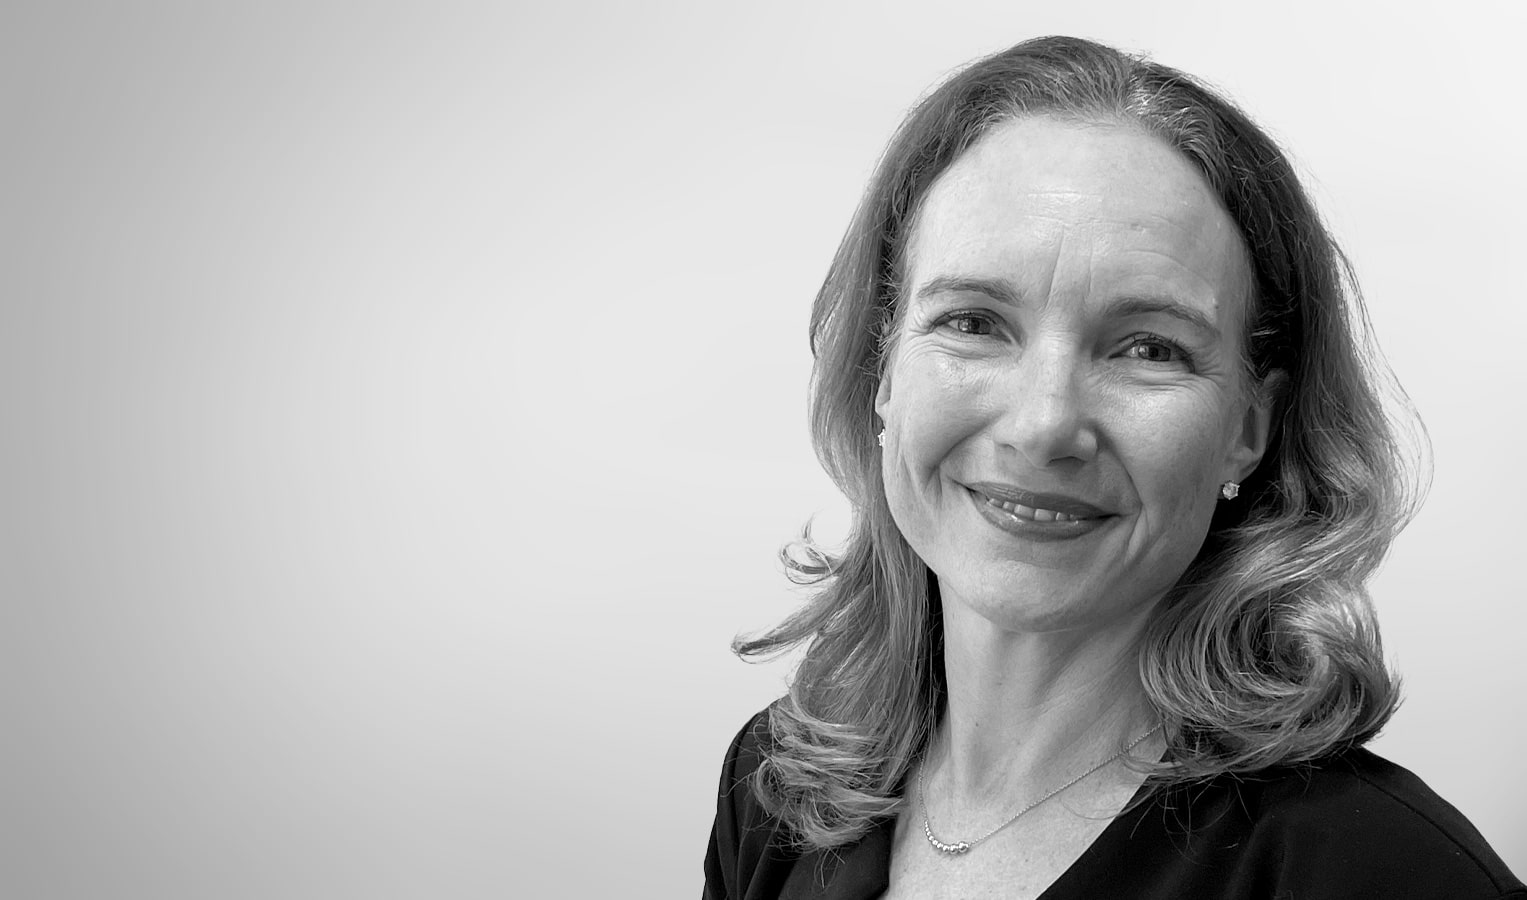 Sandpiper Appoints Francesca Boase to Lead Global Professional Services Practice